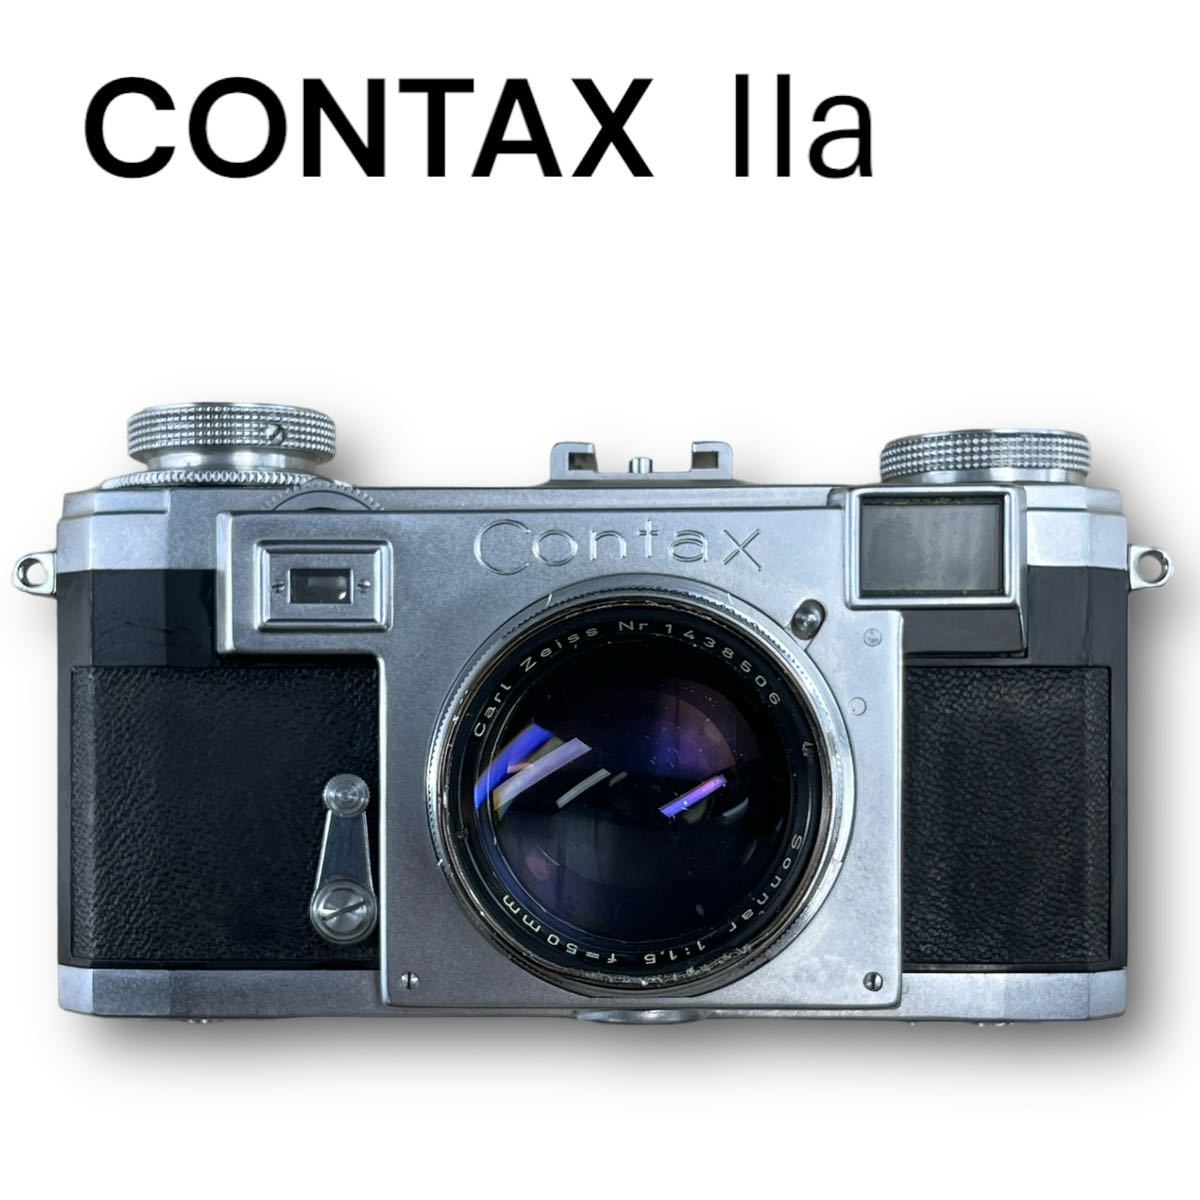 【Zeiss レンズ付属】コンタックス CONTAX 2a IIa おまけのレンズZeiss-Opton Sonnar 50mm F1.5付き_画像2